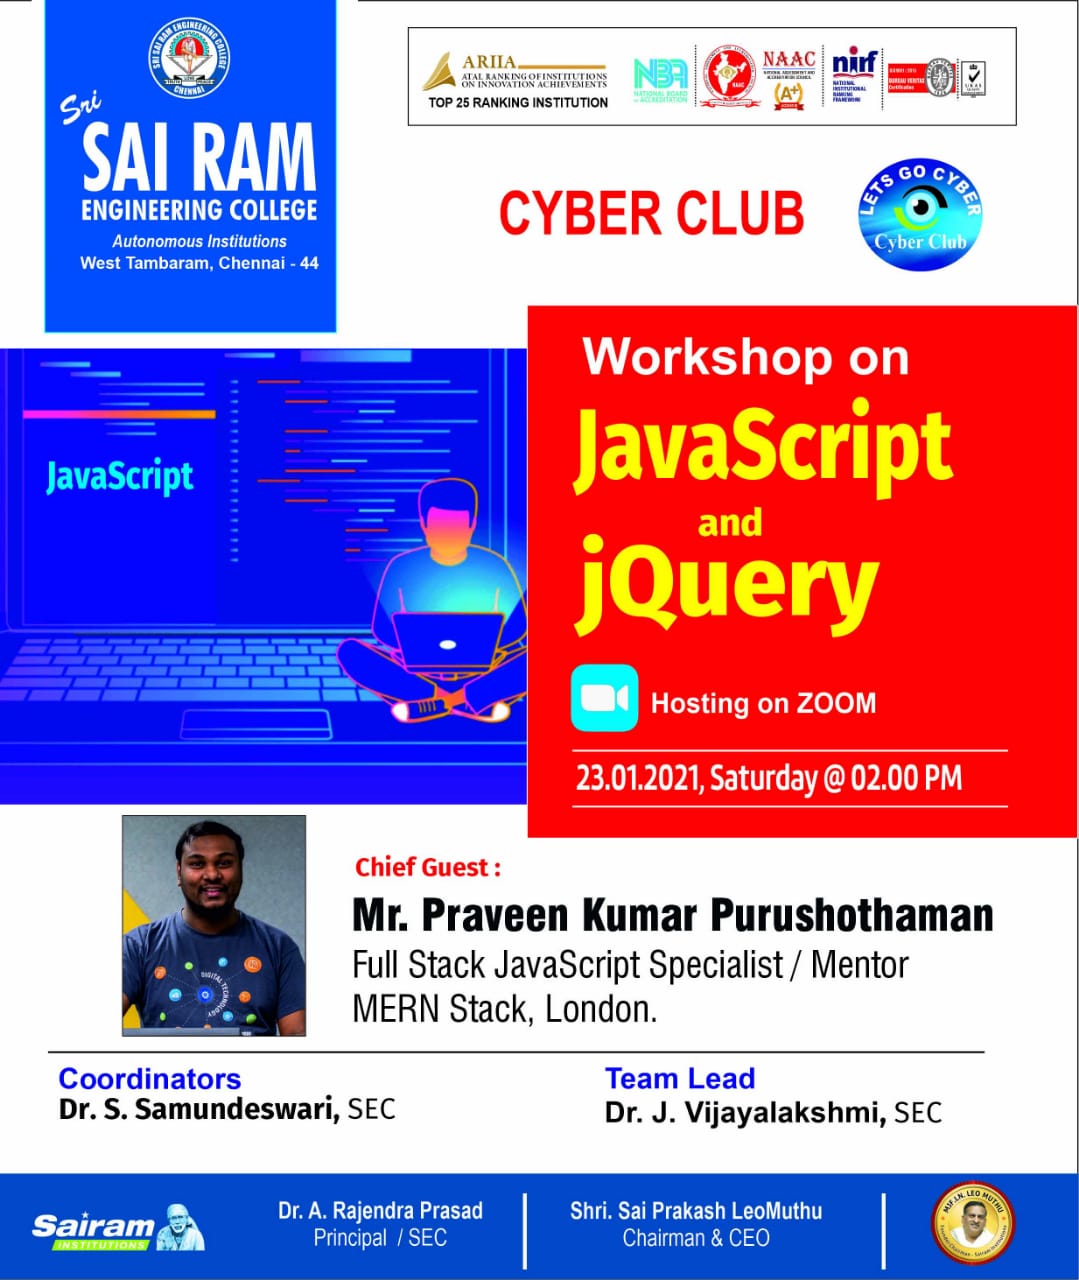 Cyber club conducts a workshop on “JavaScript and JQuery” by Praveen Kumar Purushothaman Full Stack JavaScript Specialist / Mentor – MERN Stack on 23/1/2021.